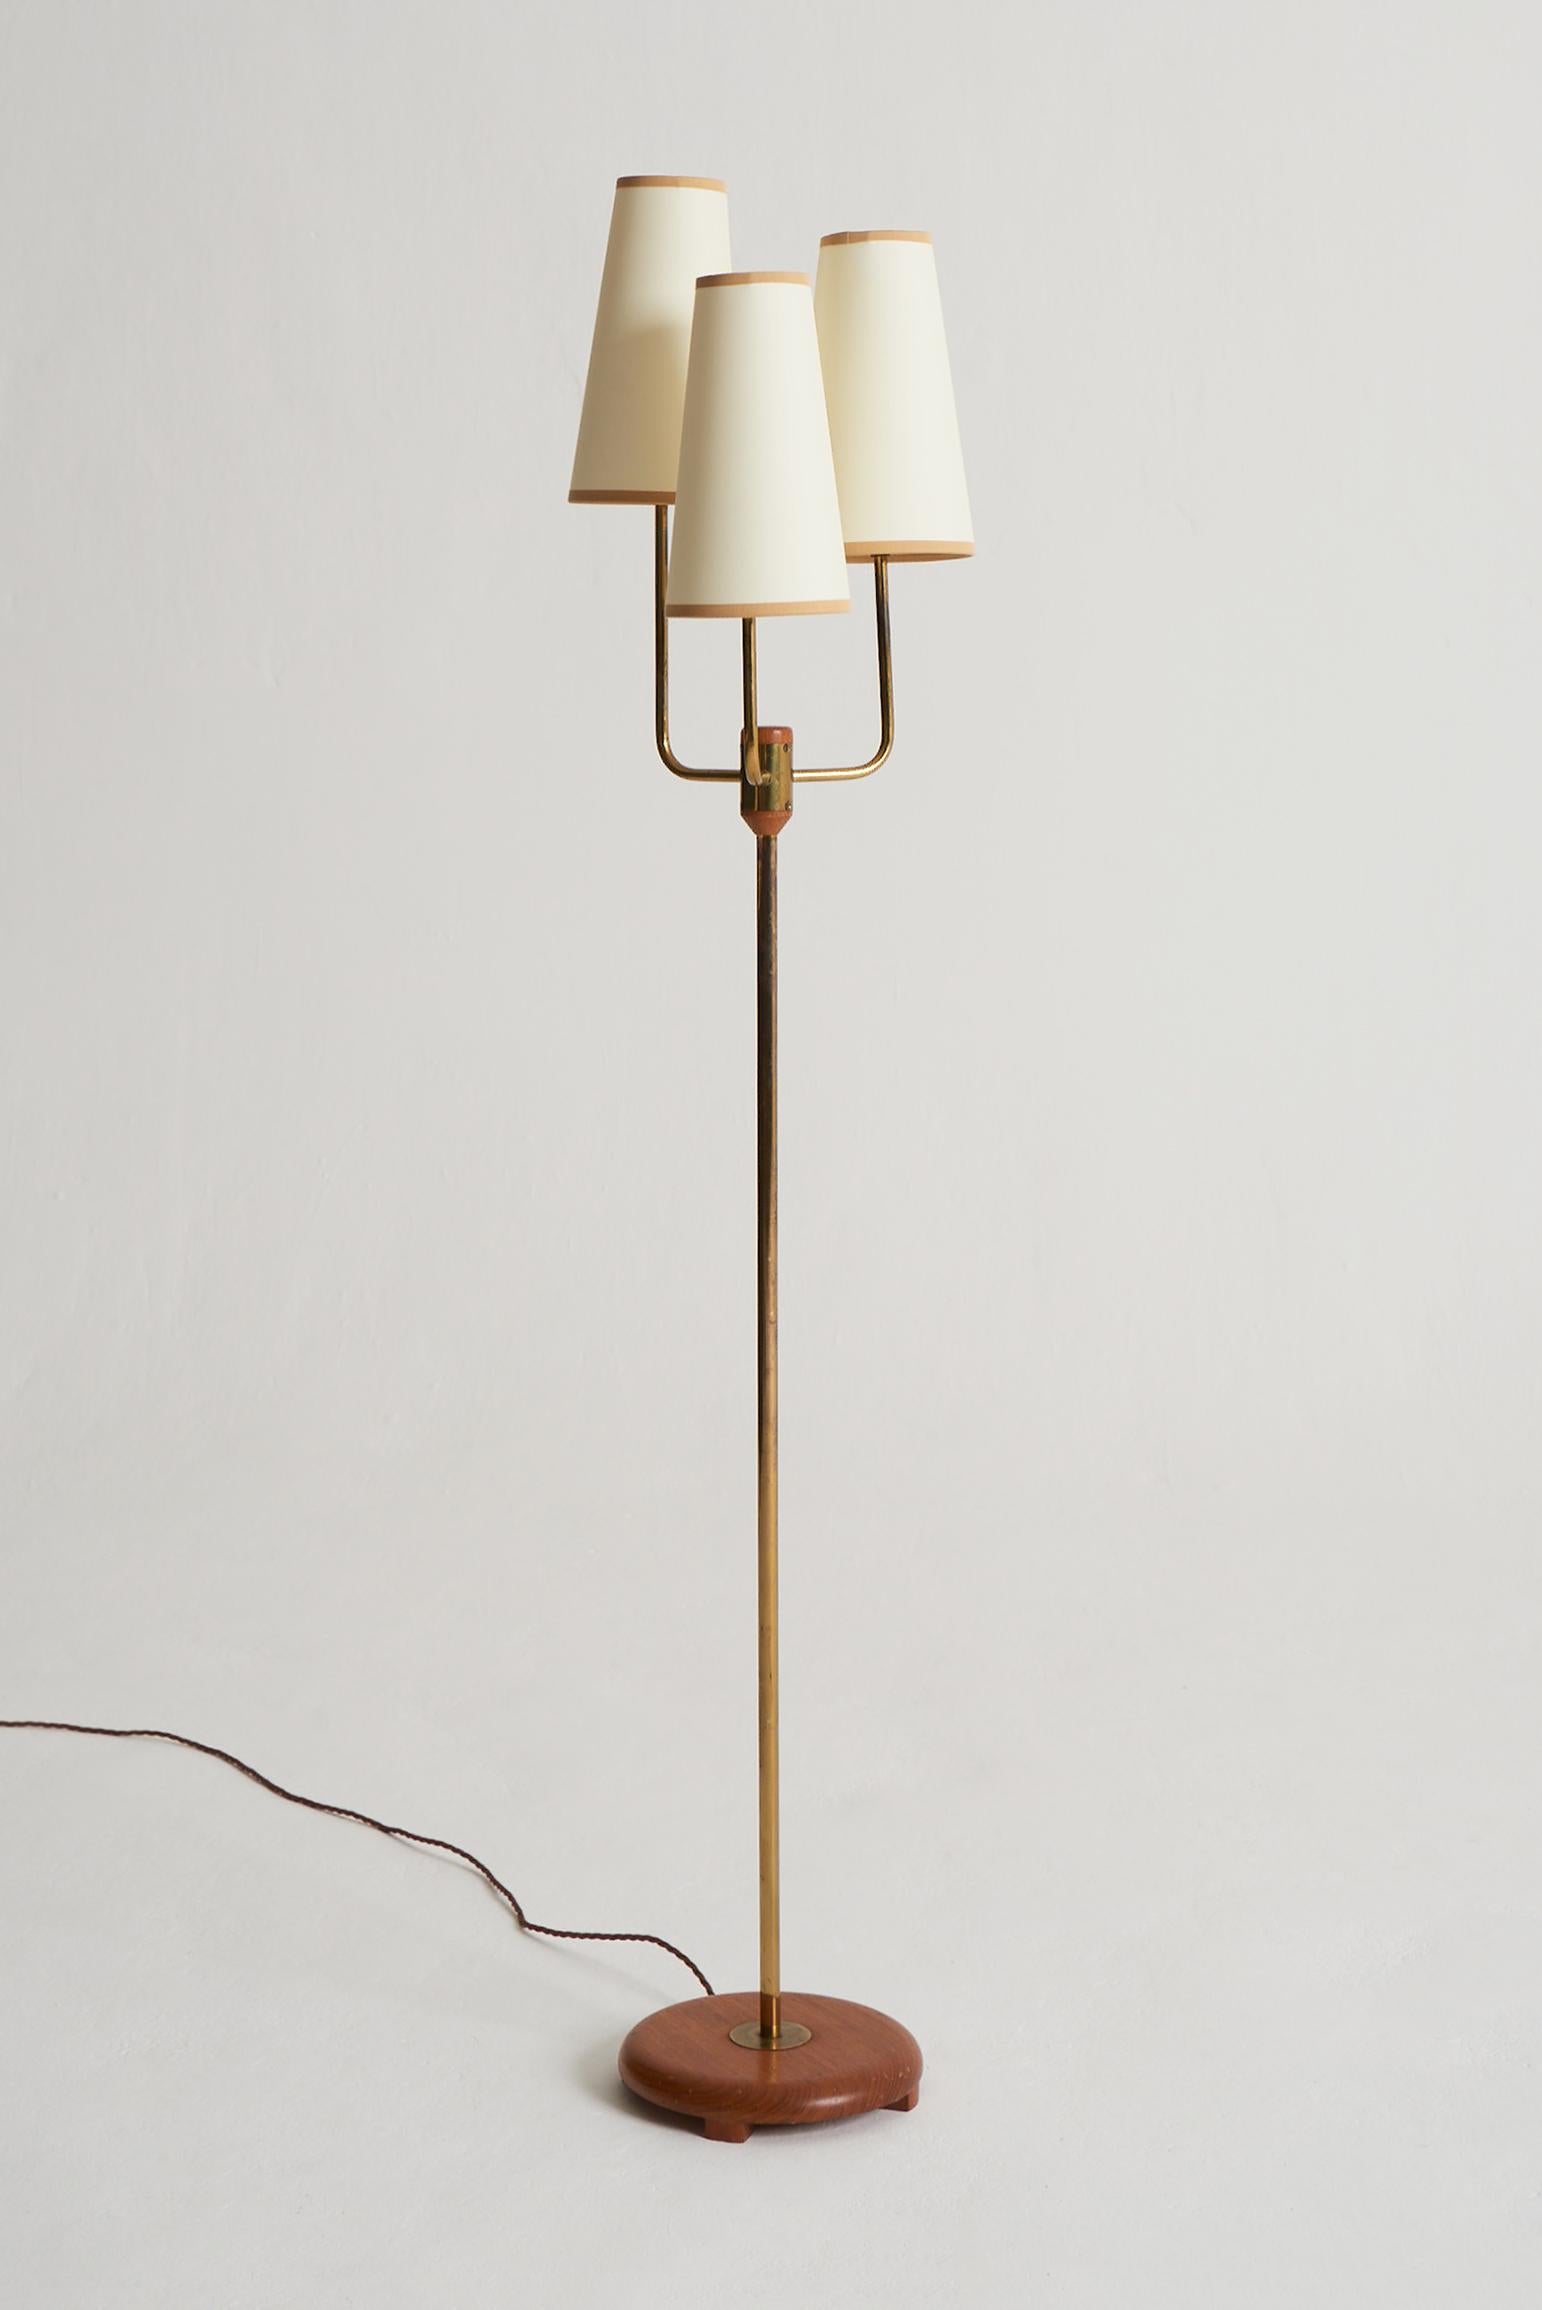 A brass and teak three-armed floor lamp, with bespoke shades.
Sweden, third quarter of the 20th century.